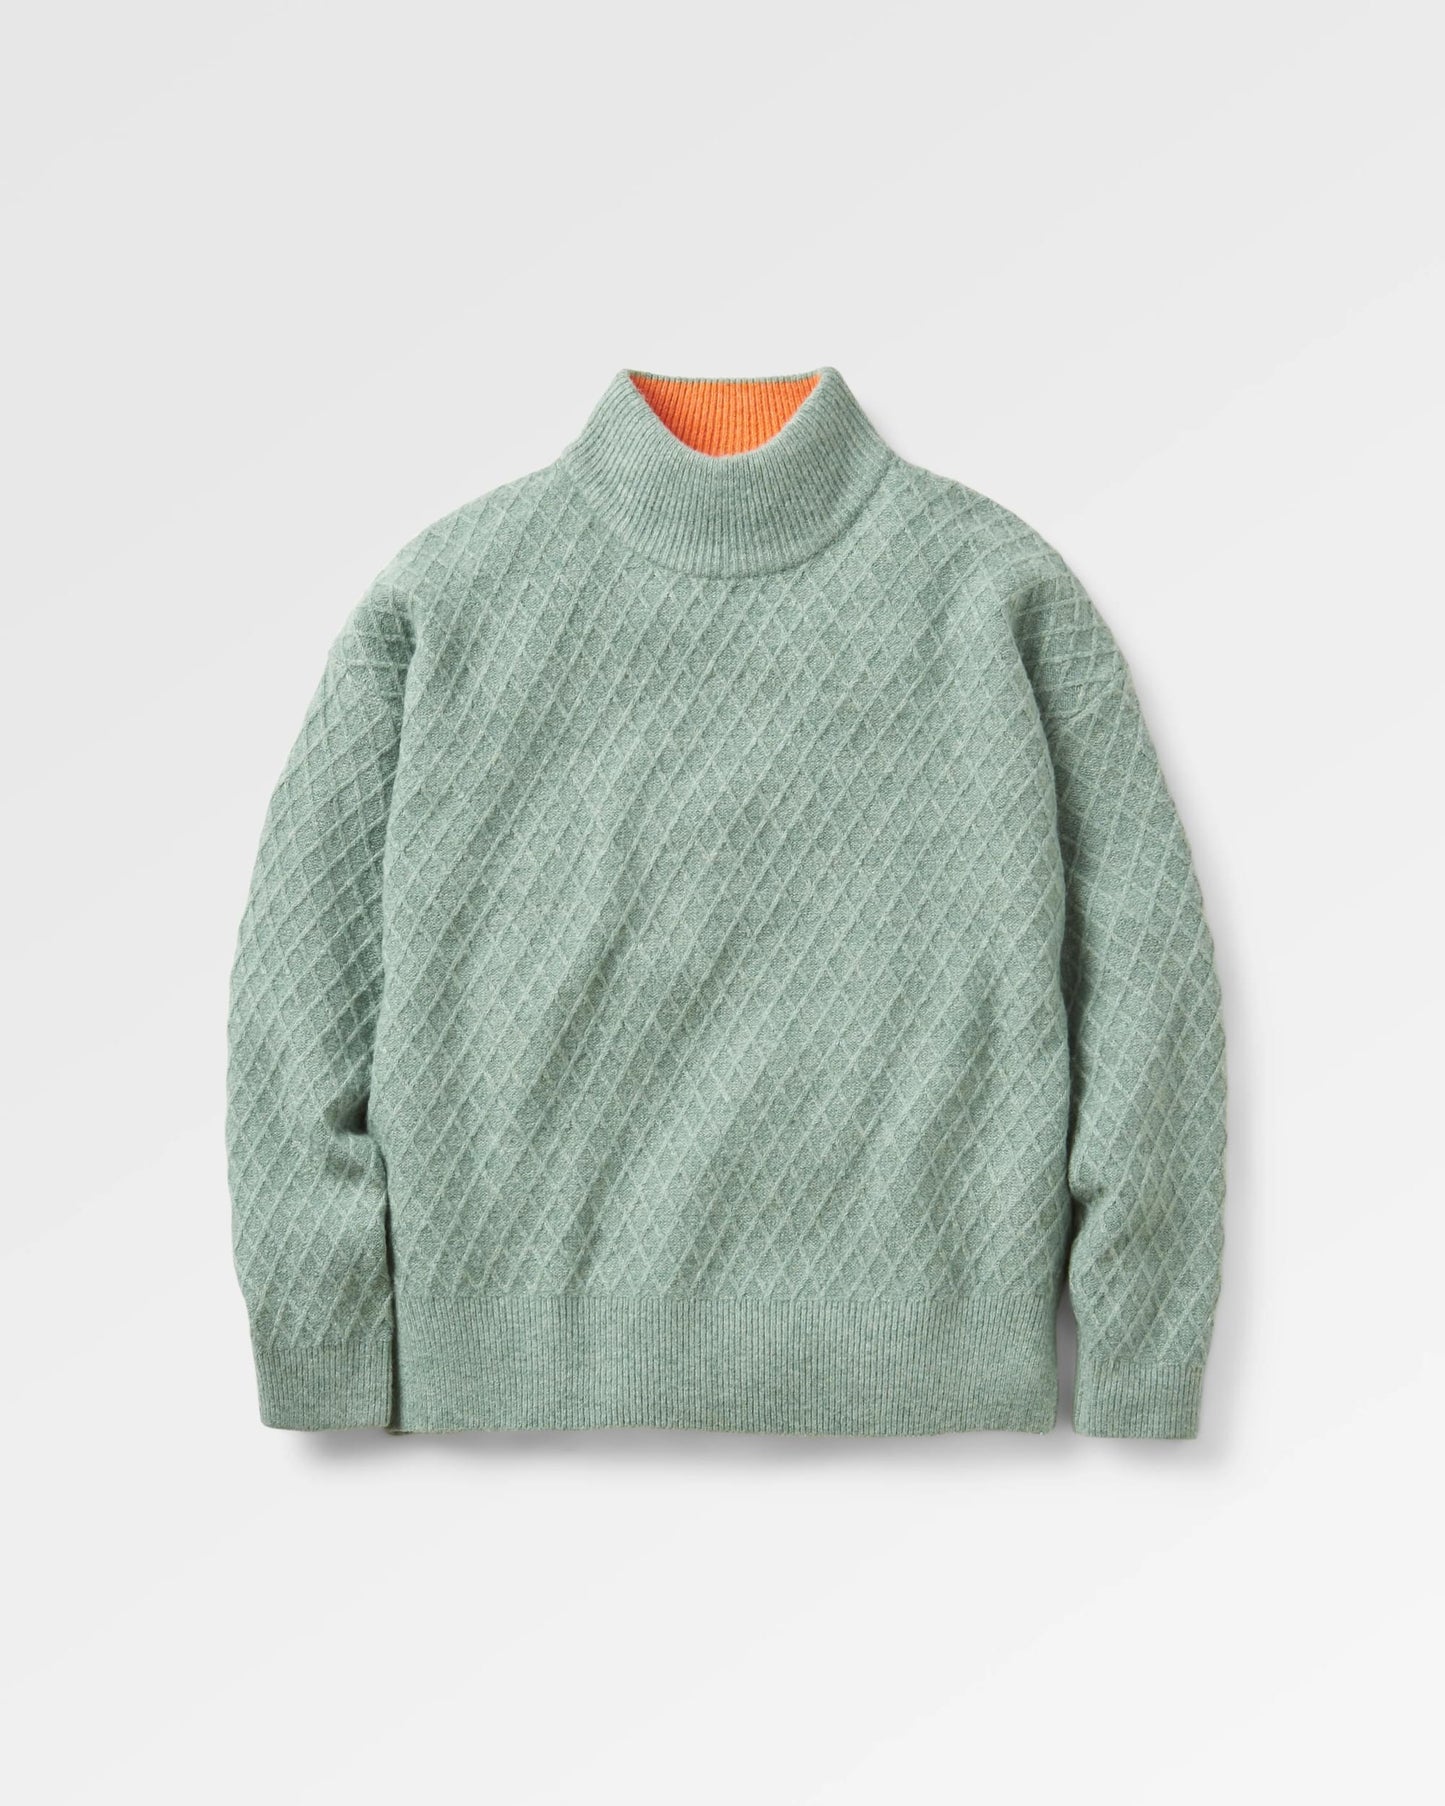 Hinterland Recycled Knitted Jumper - Pistachio